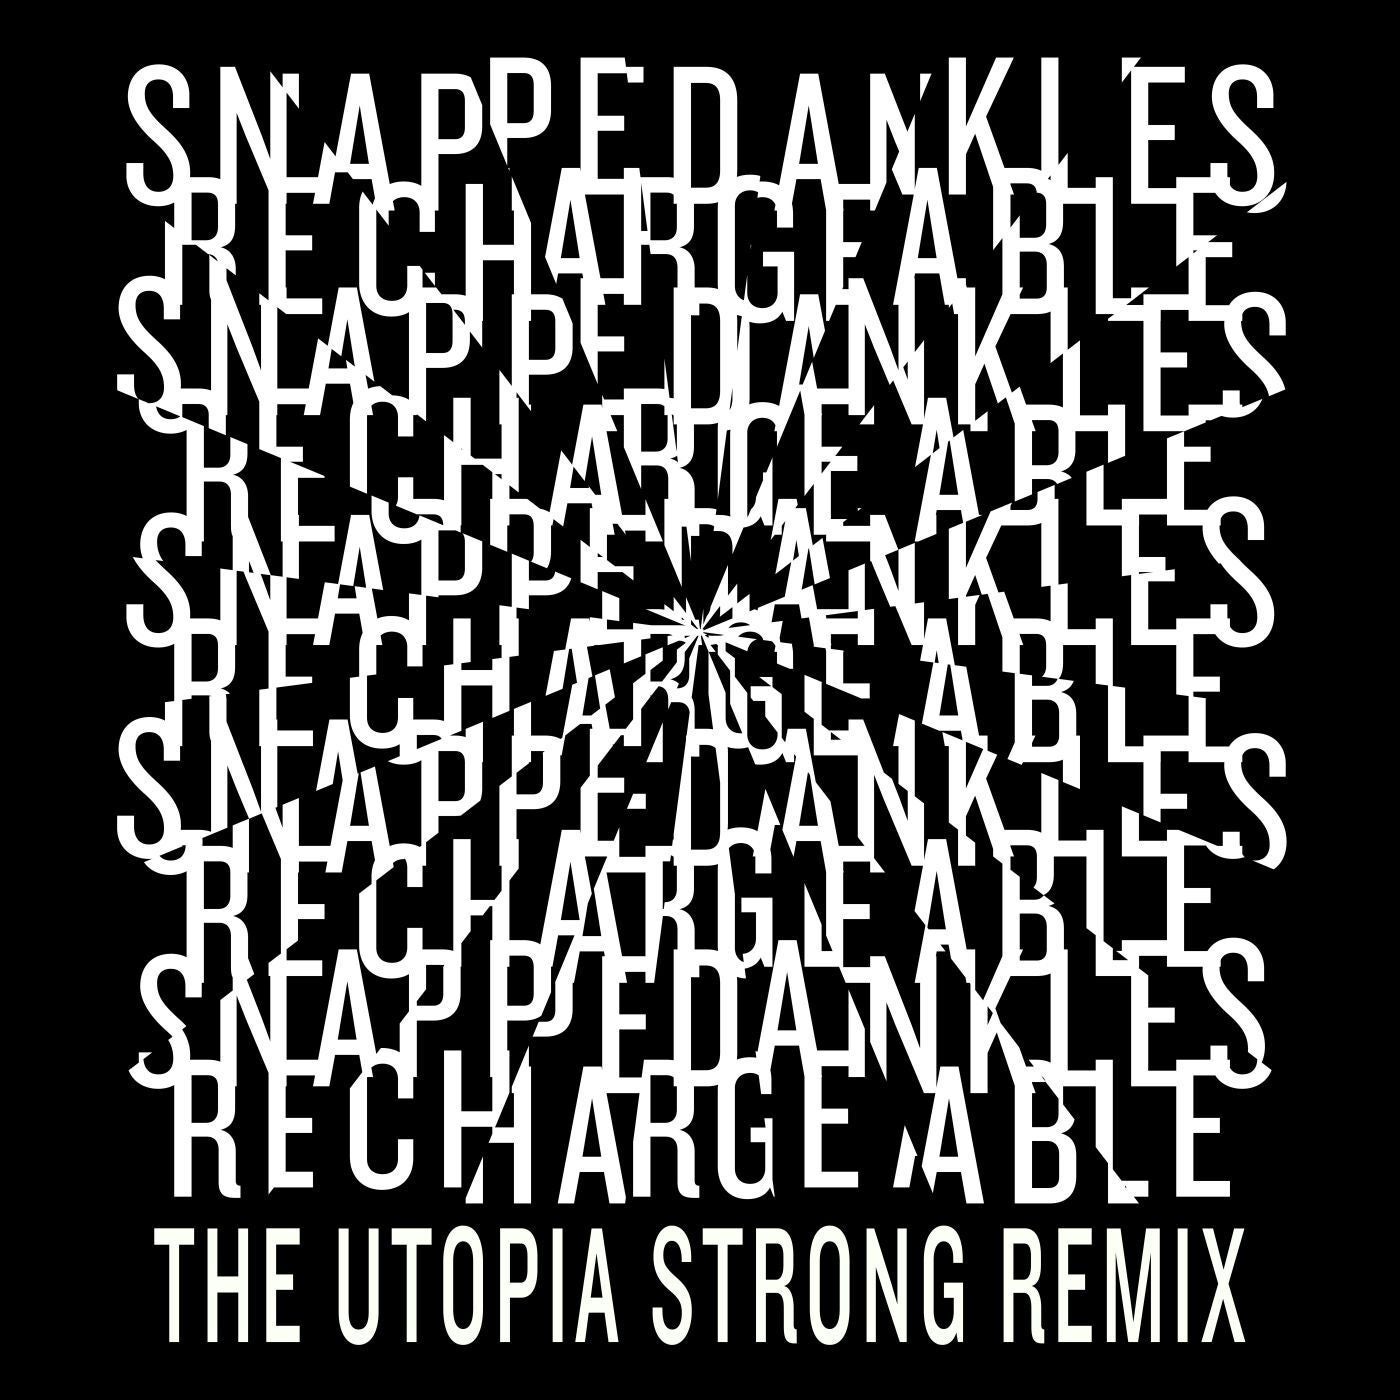 Rechargeable - The Utopia Strong Remix